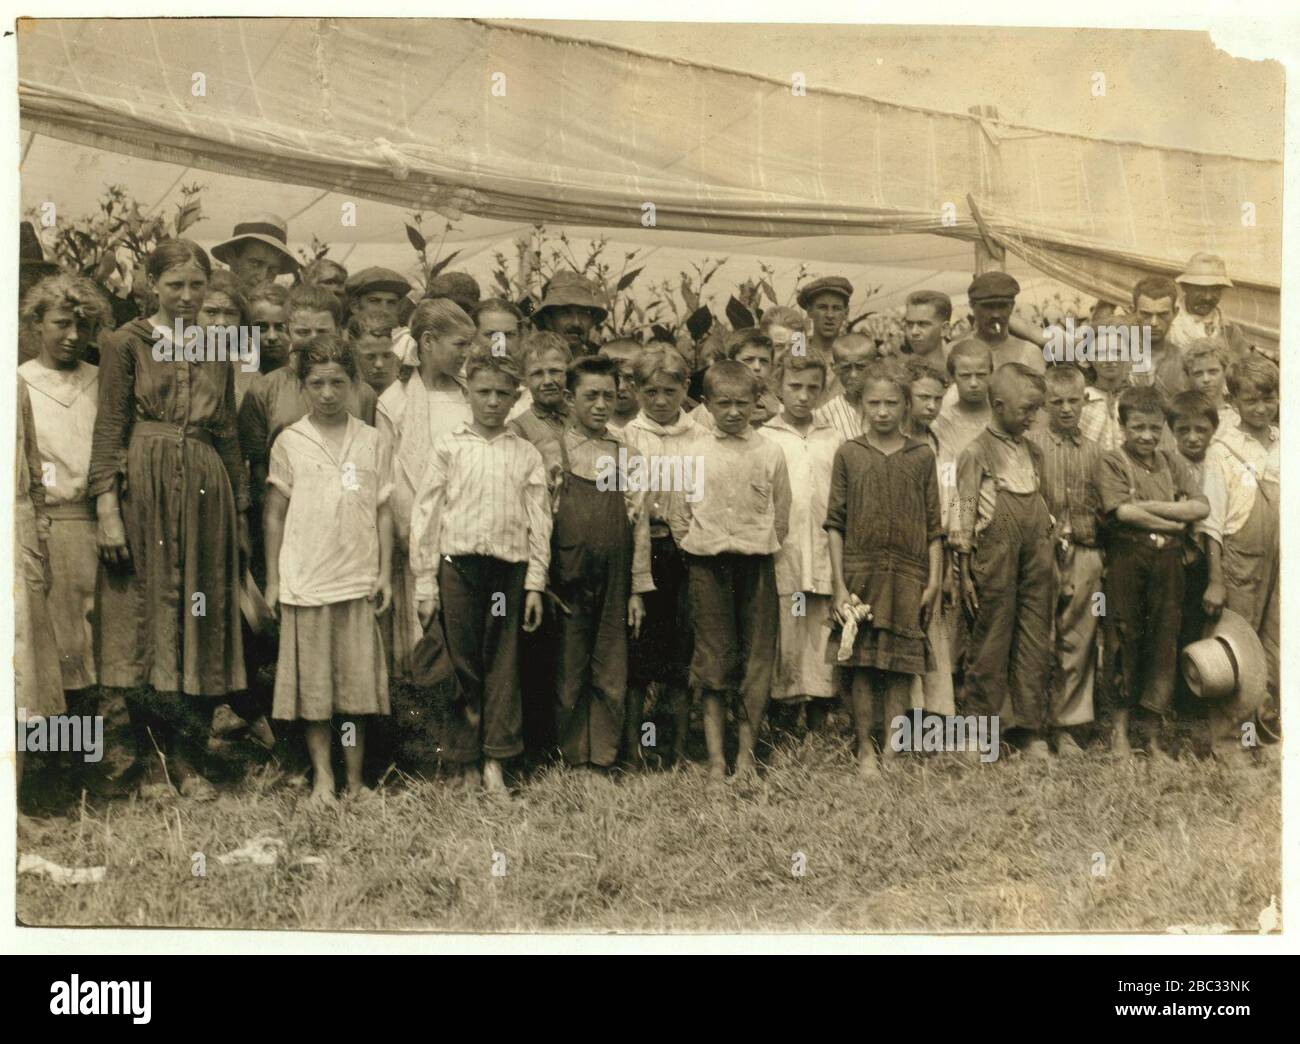 Group of tobacco pickers in Bermant plantation, 3 were 10 yrs, 3 were 11 yrs, 13 were 12 yrs, 12 were 13 yrs, 2-14 yrs old. The owner said, 'They all get $1.25 a day.' Stock Photo